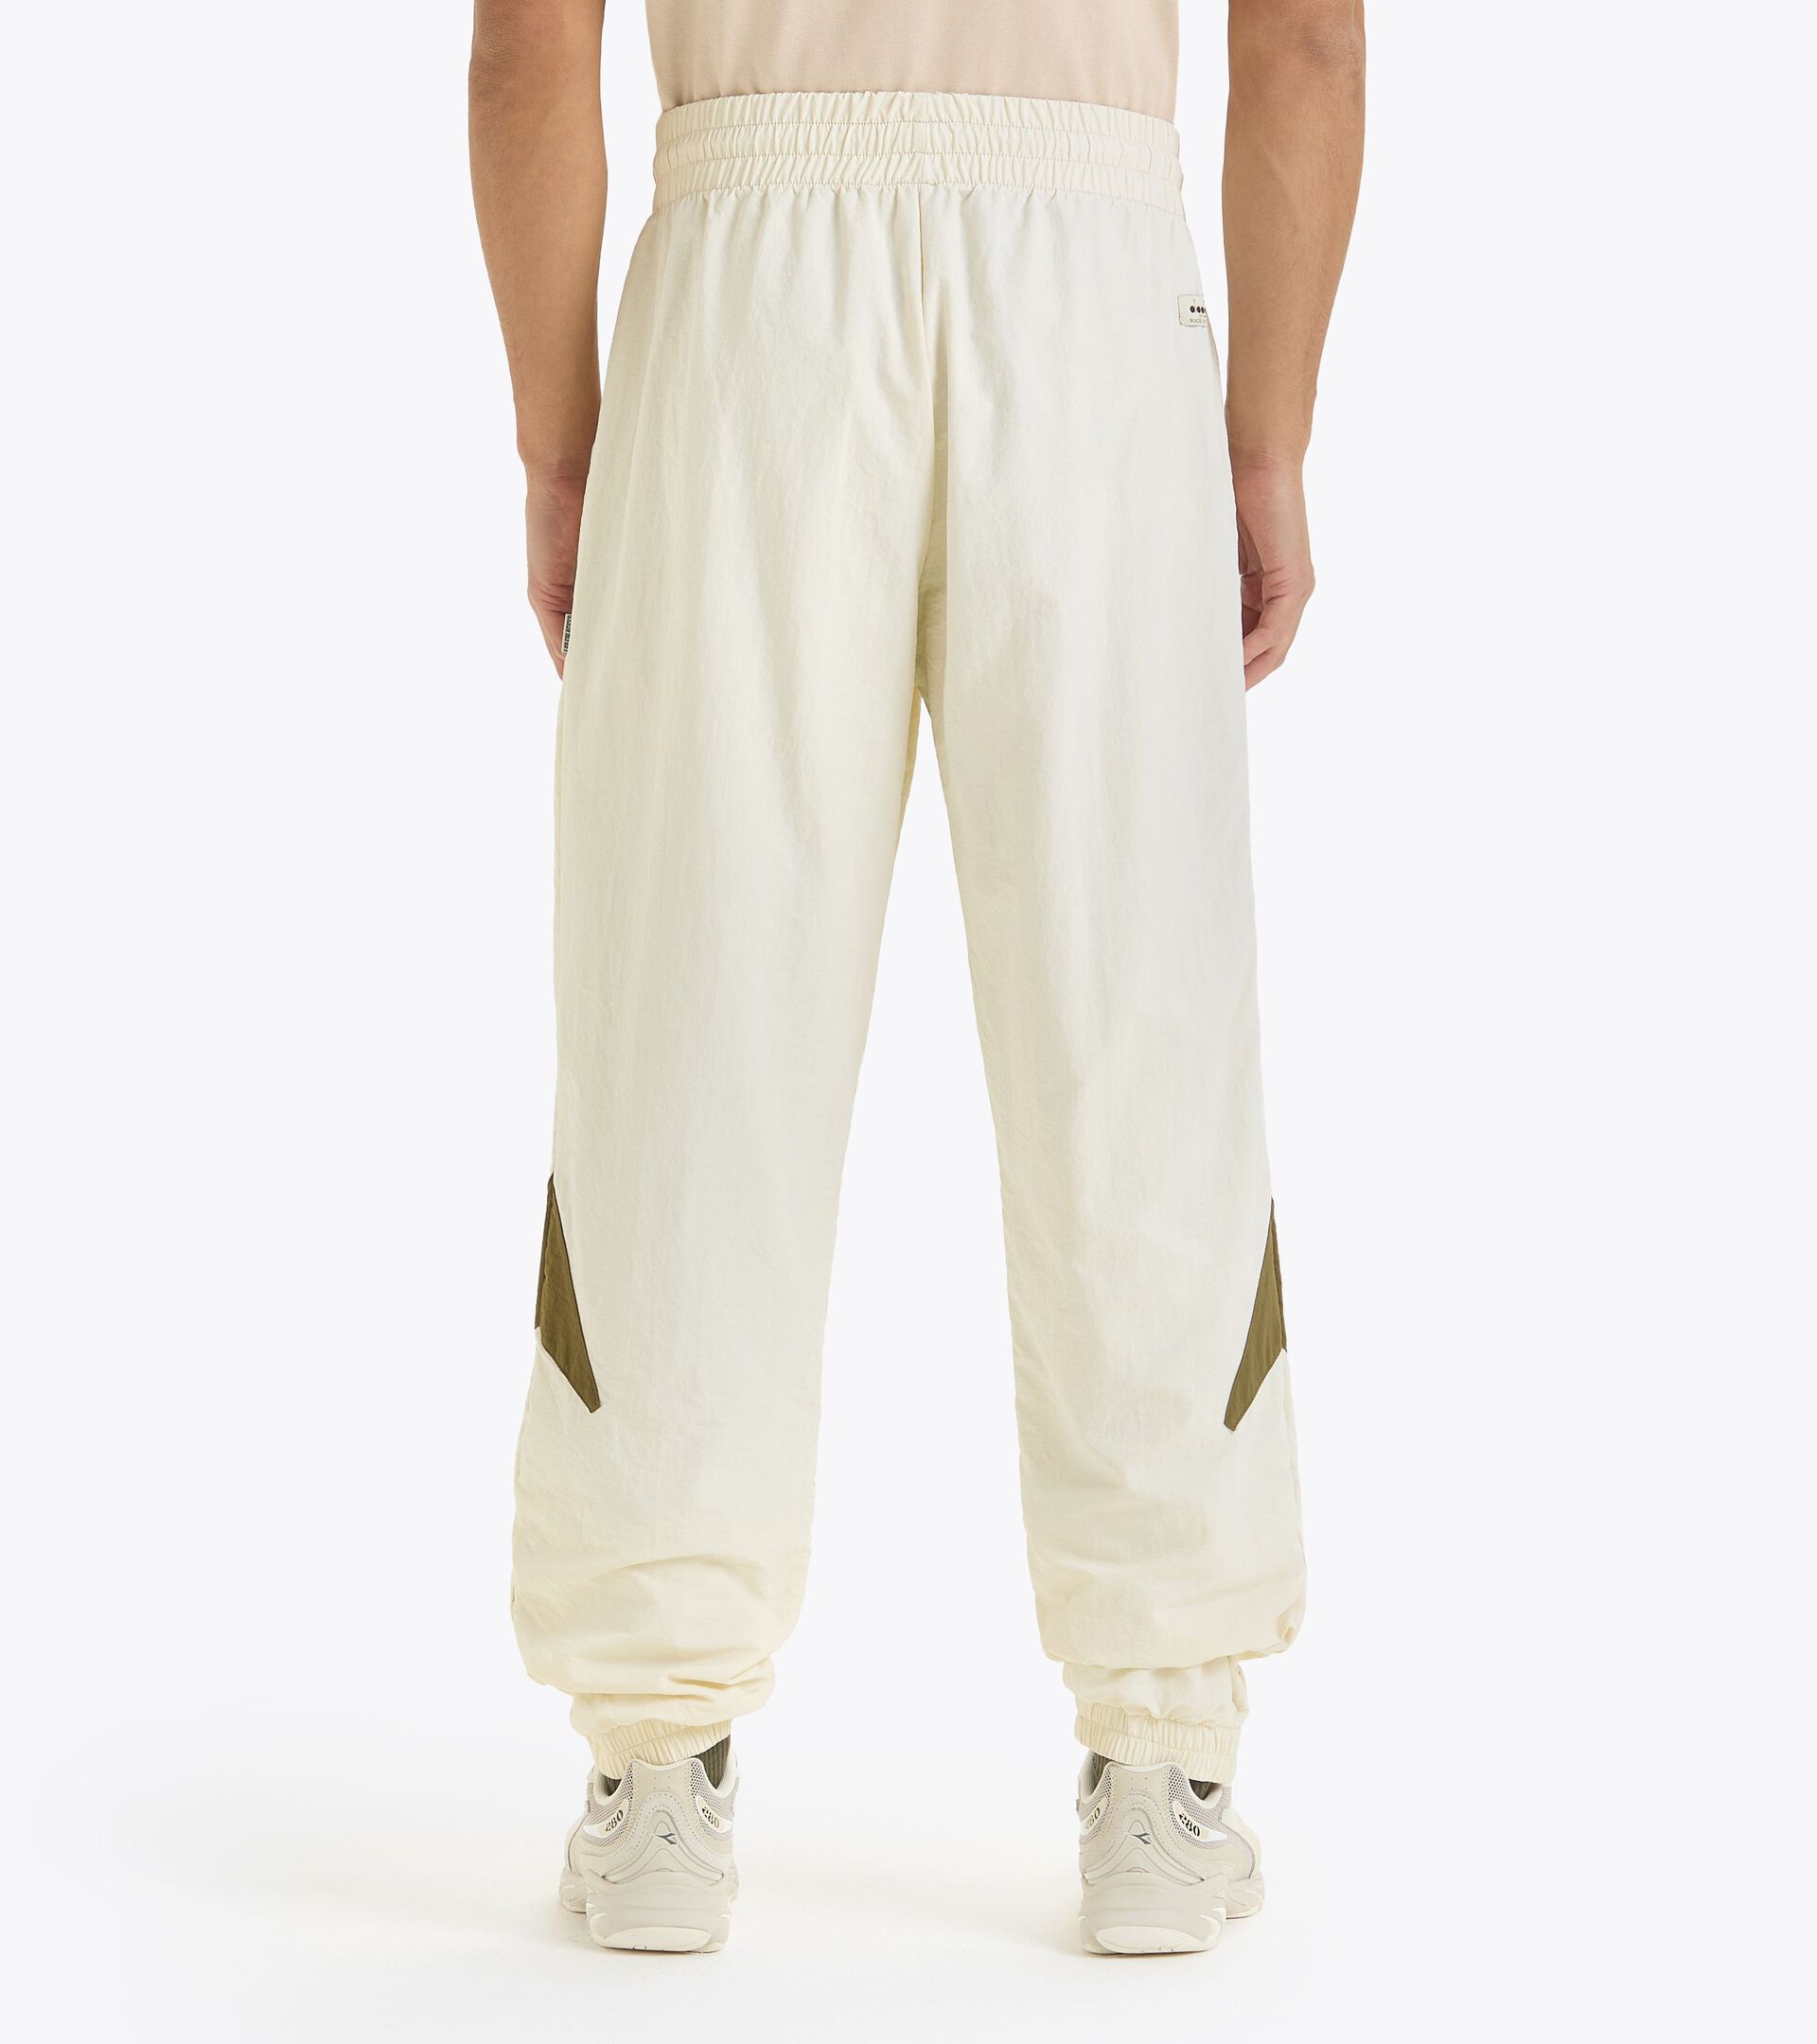 JOGGER PANTS LEGACY Joggers - Made in Italy - Gender Neutral - Diadora  Online Store